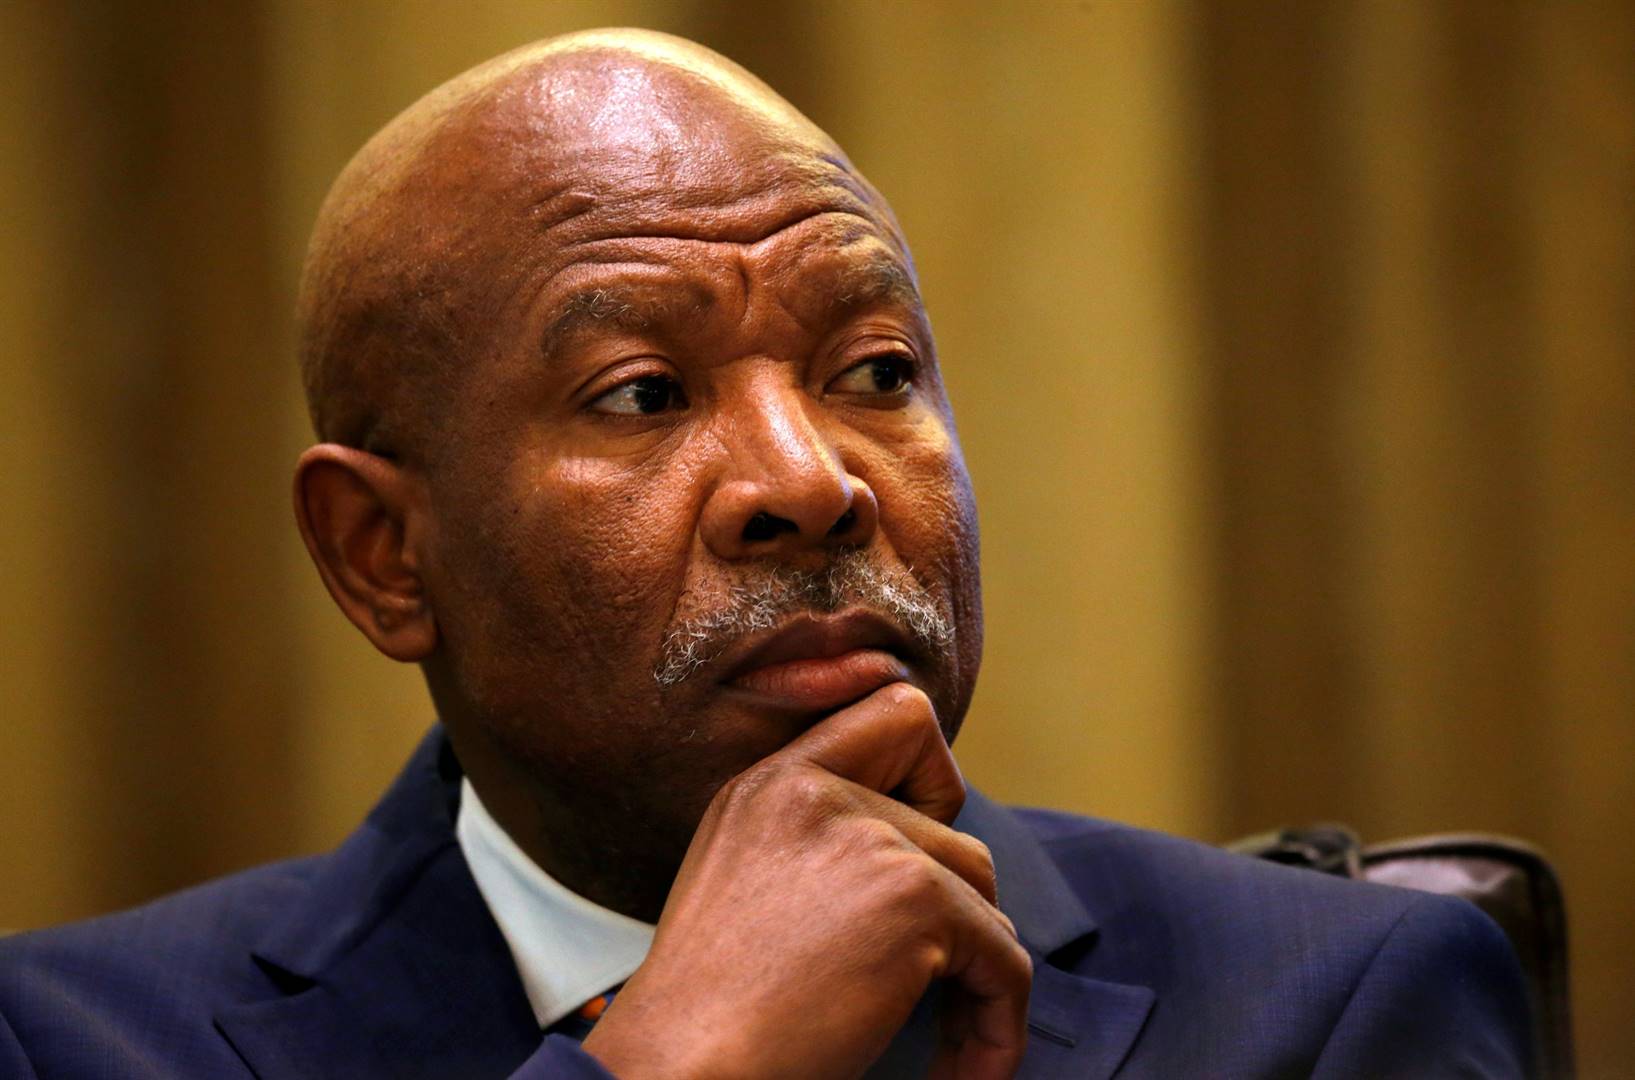 Lesetja Kganyago, the Reserve Bank governor, delivered the 10th annual Michel Camdessus lecture at the IMF on Tuesday, highlighting South Africa's precarious financial position